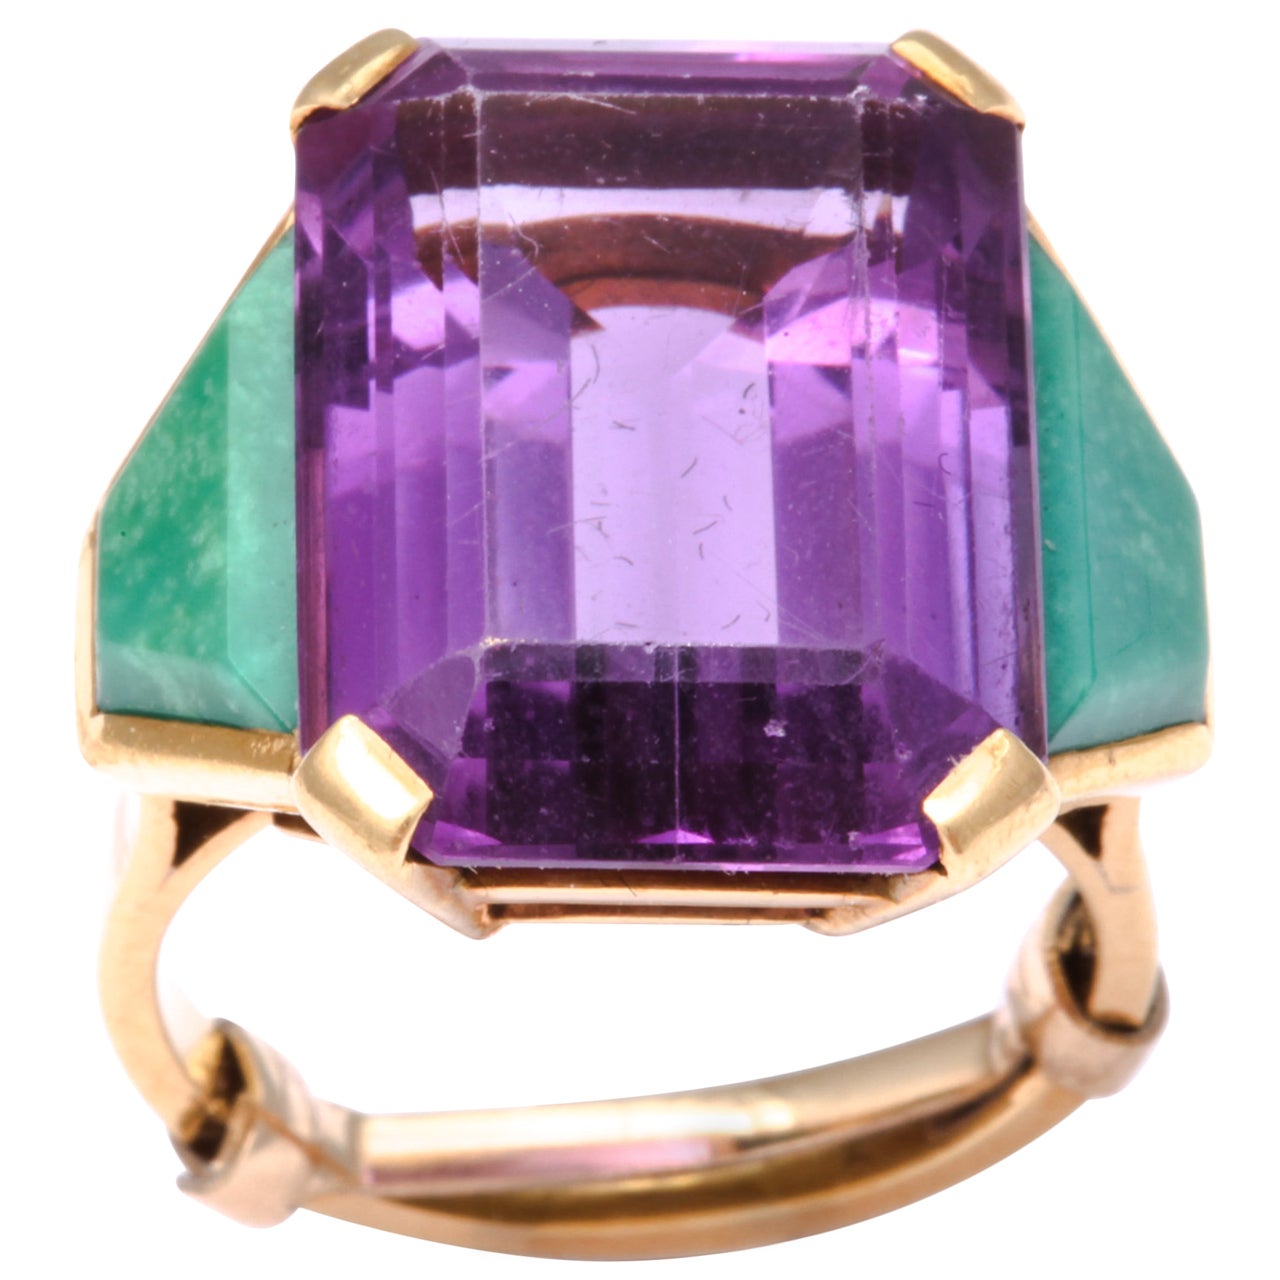 Stunning Retro Amethyst Ring with Amazonite Baguettes